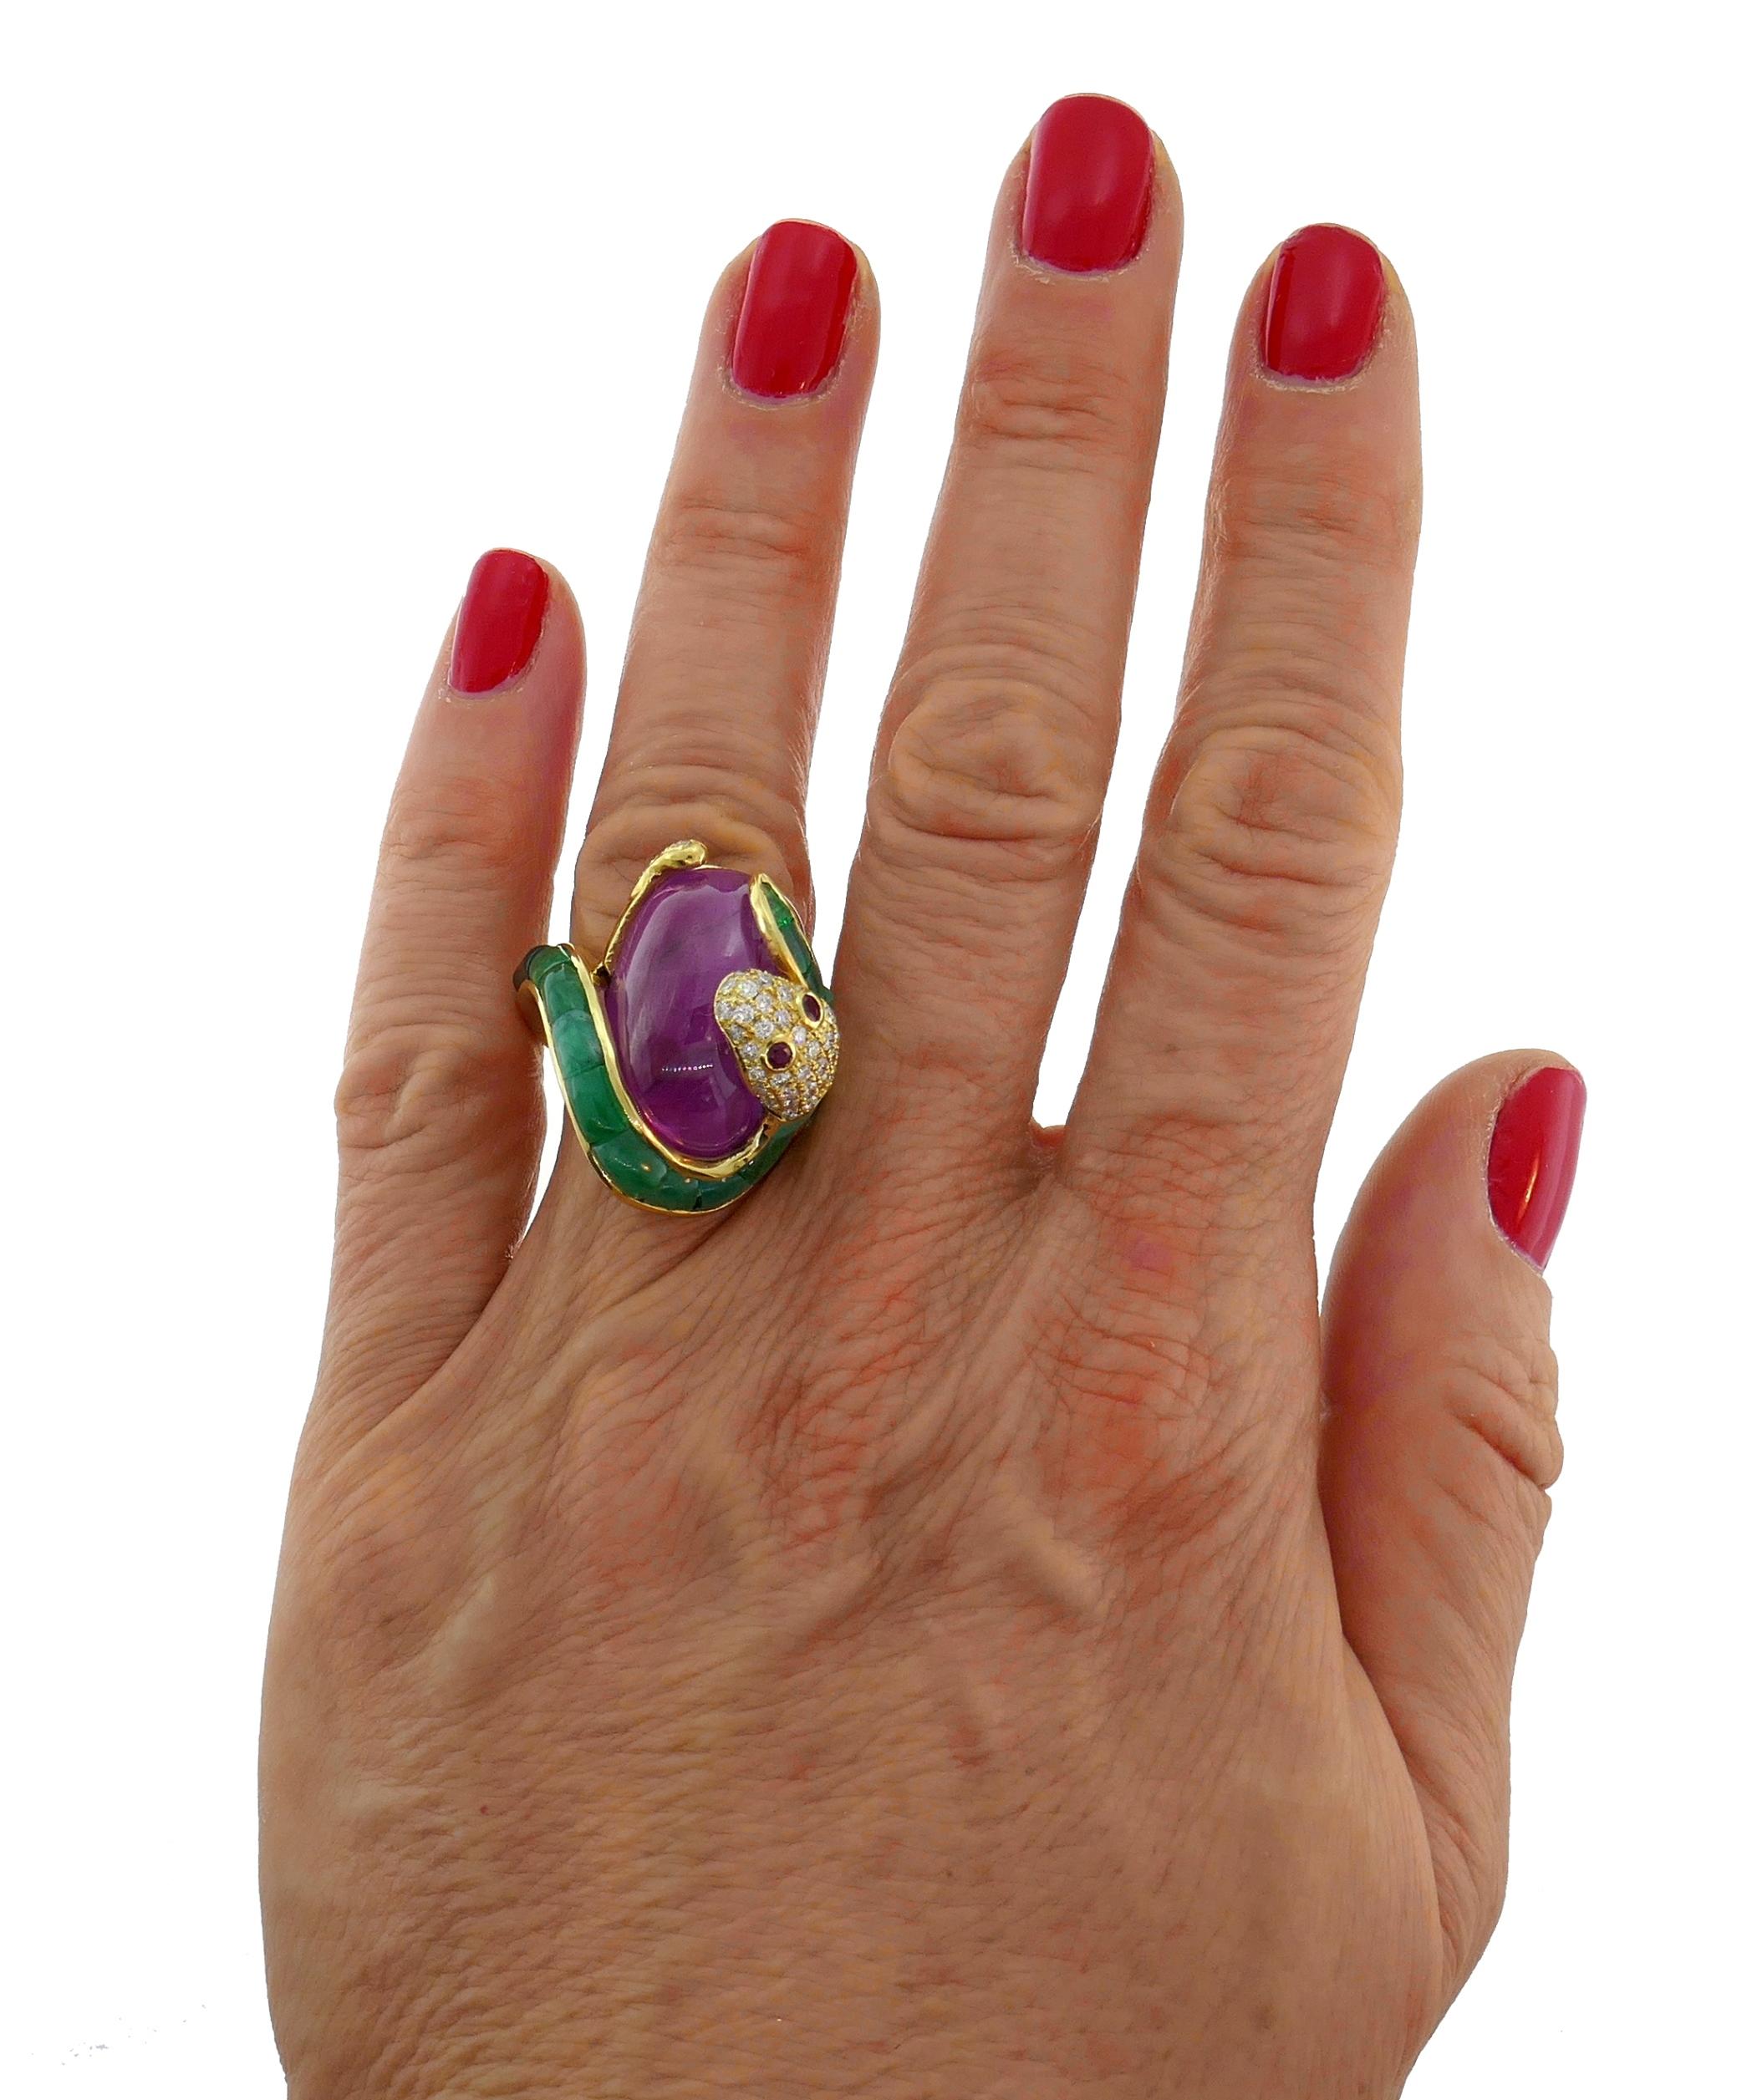 Bold and articulated cocktail ring created in the 1980s.
Made of 18 karat (tested) yellow gold, cabochon ruby, pave set round brilliant cut diamonds (G-H color, VS clarity, 0.25 carat total), pre-cut emeralds and two round faceted